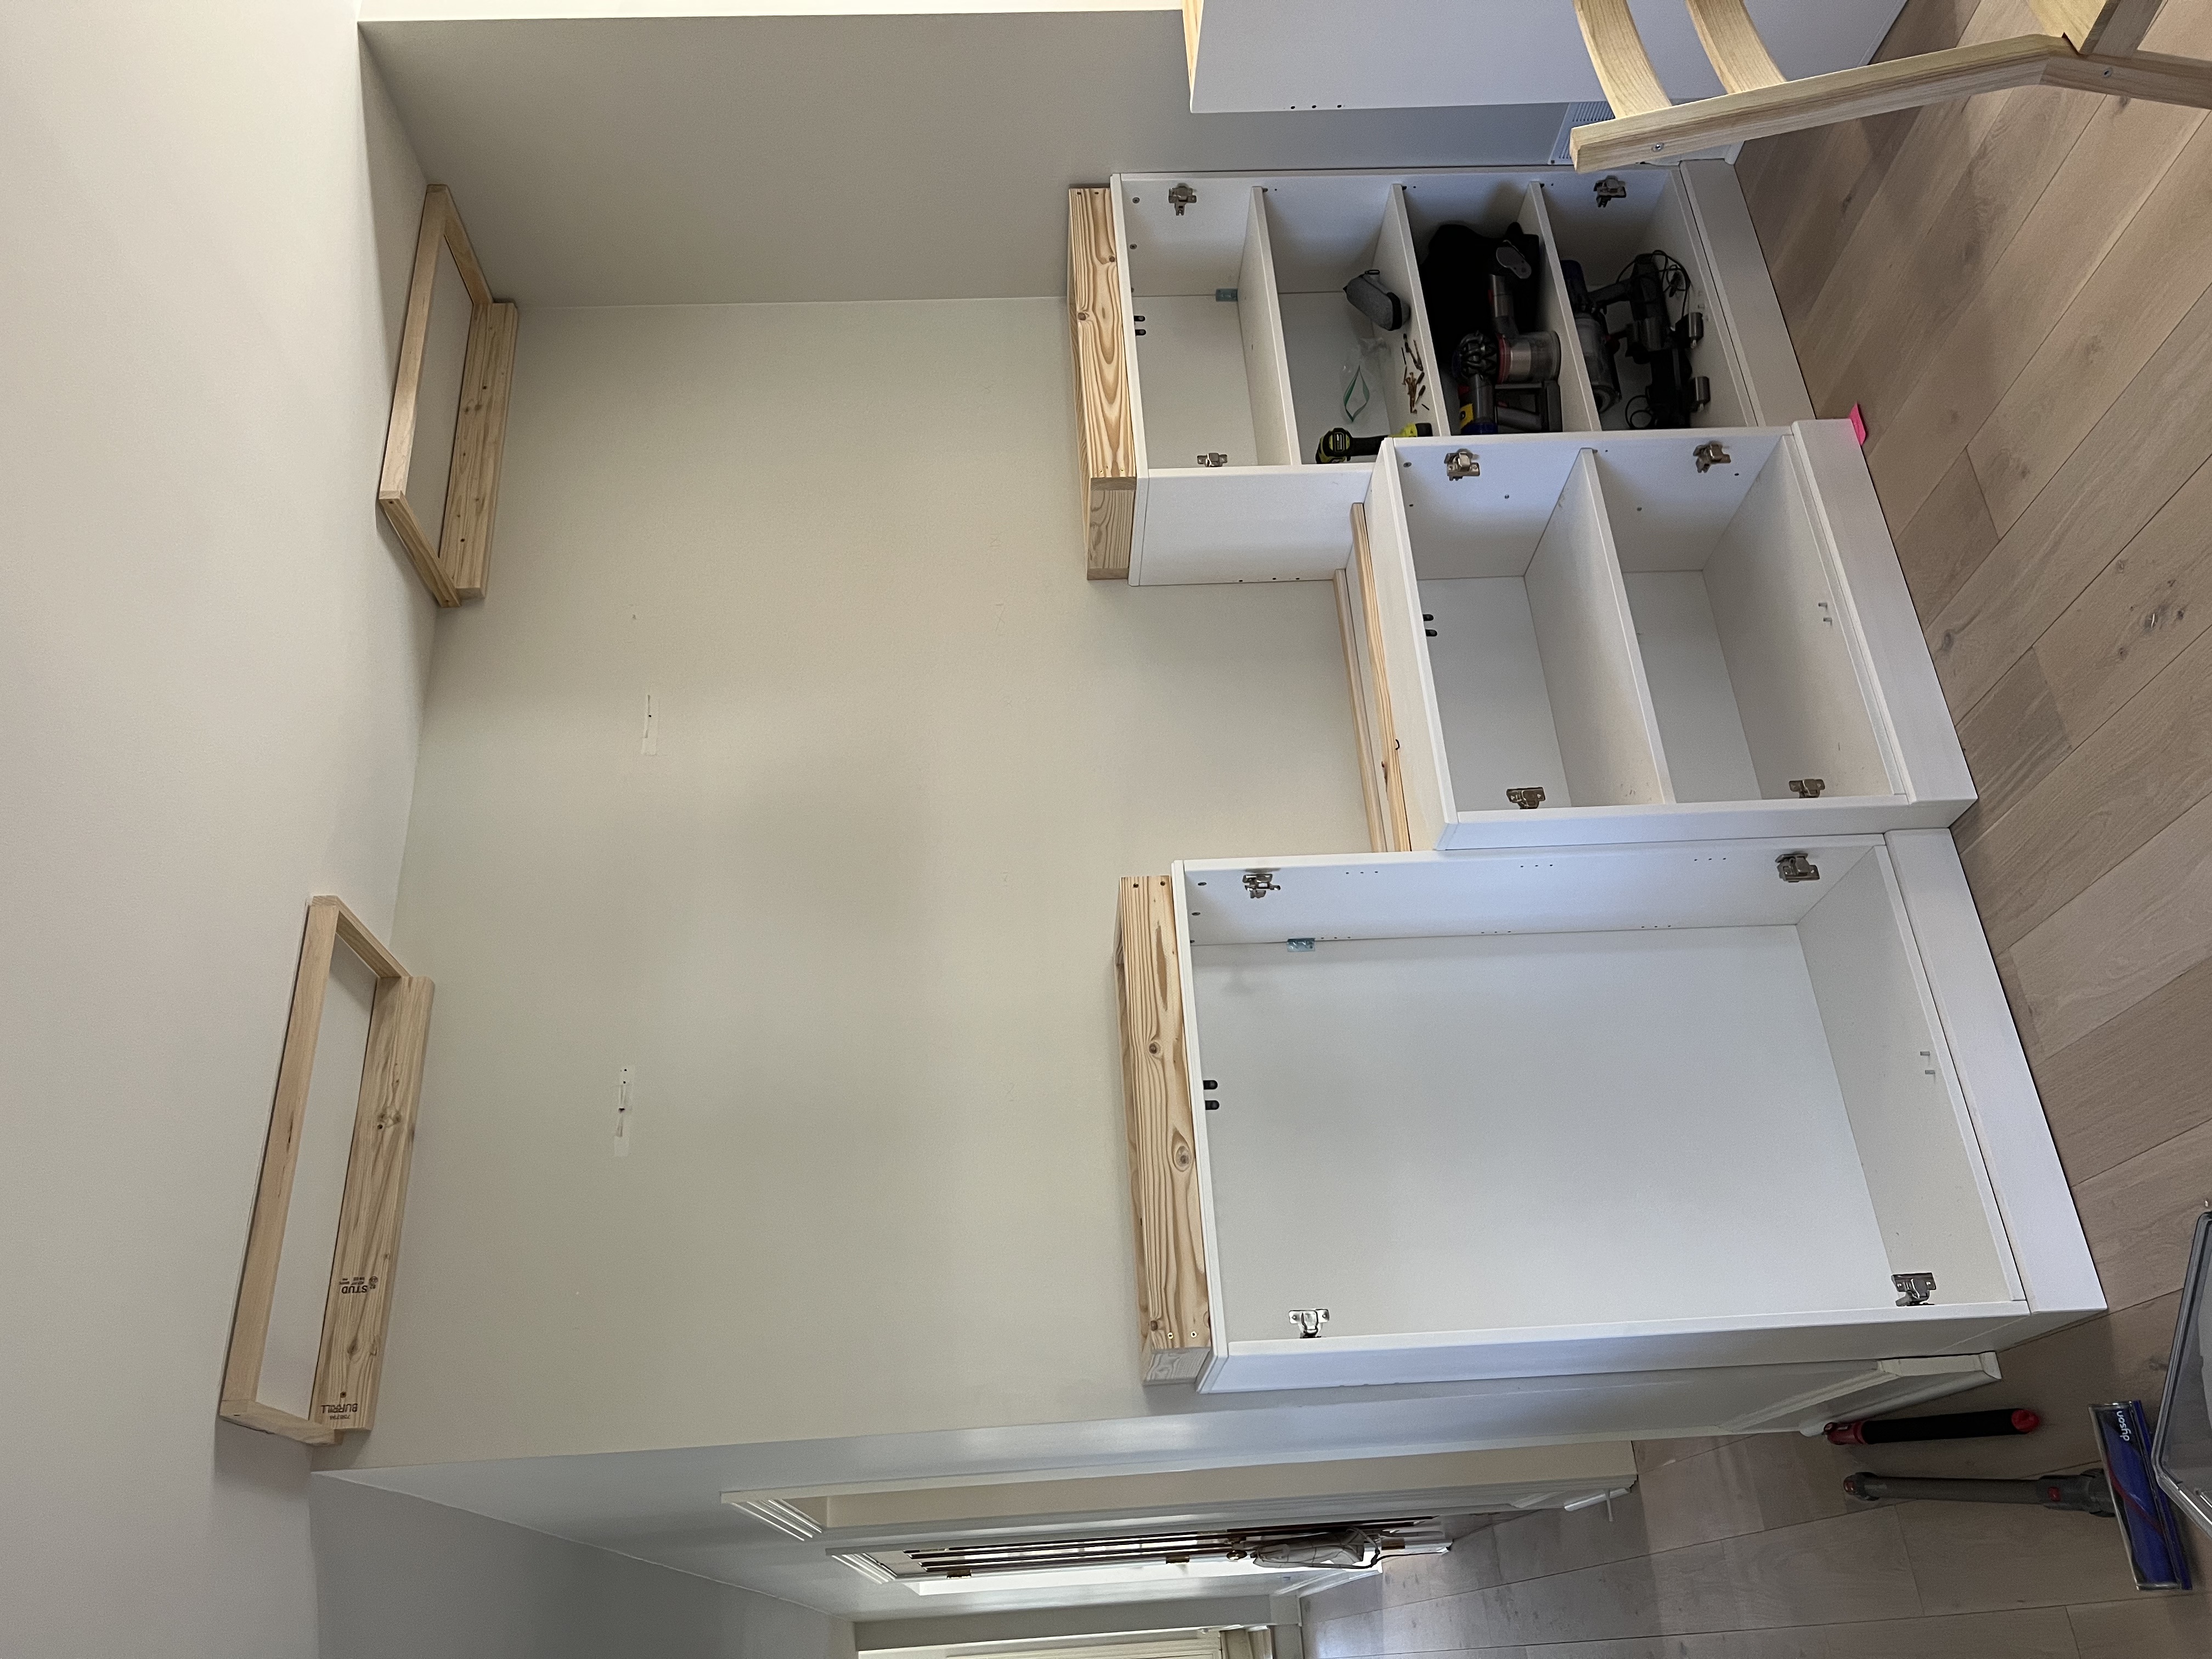 Boxes attached to top of cabinets and to the ceiling.